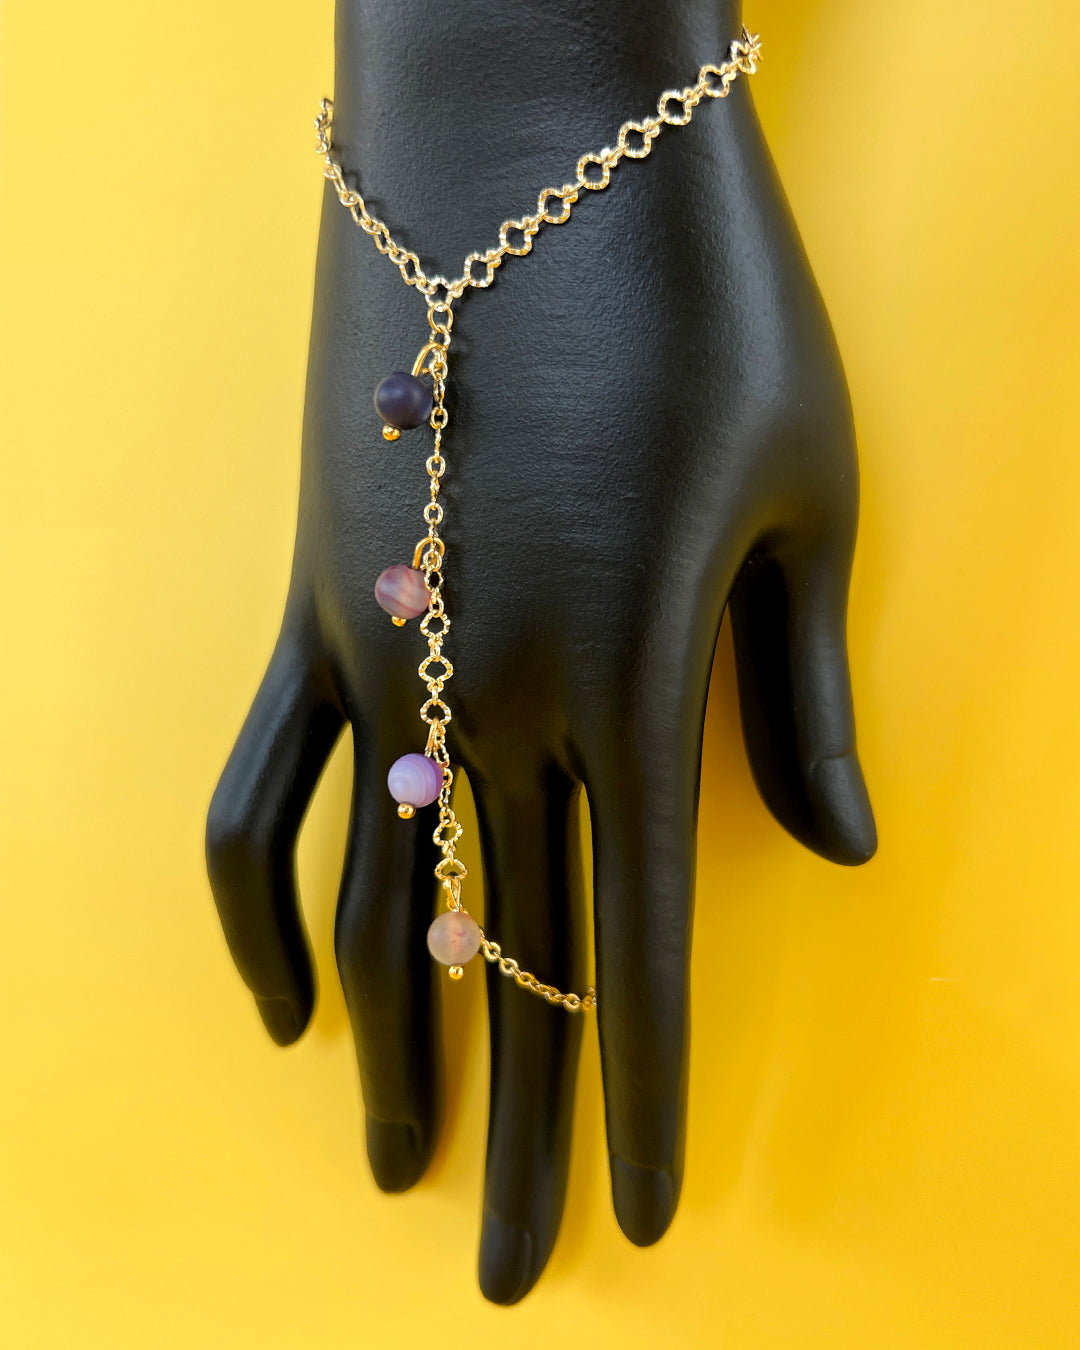 ✦ The Minimalist ✦ Bling It On Hand Chain